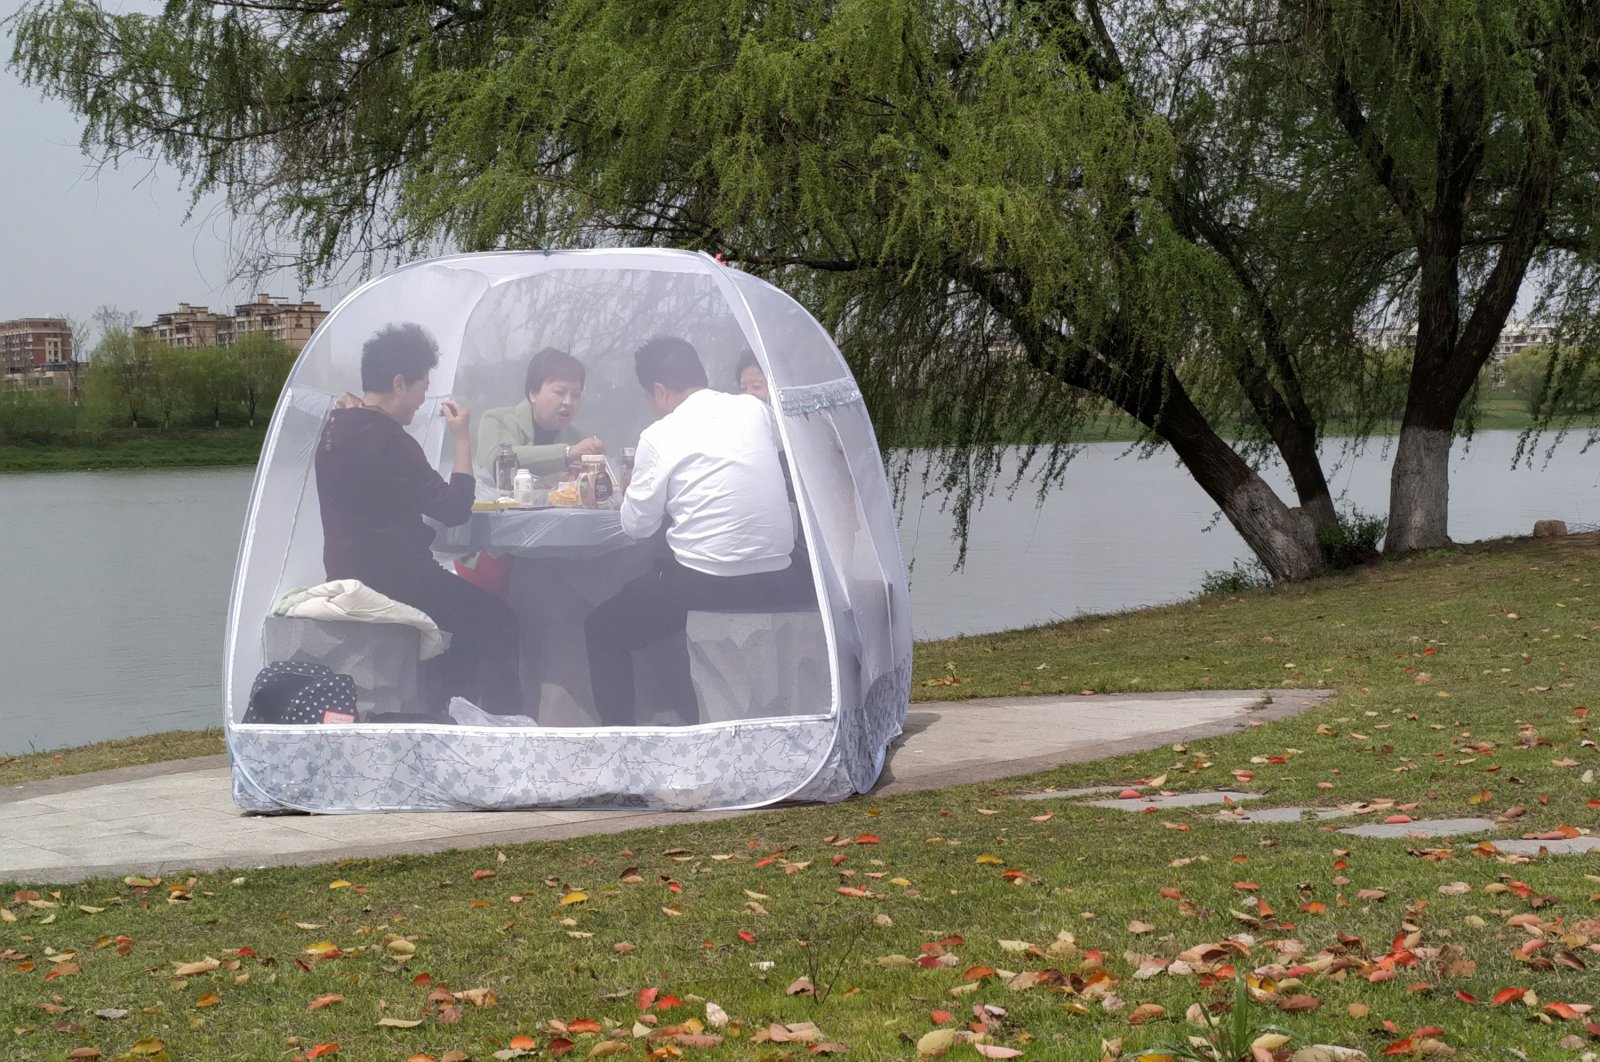 People enjoy a meal inside a tent to prevent the coronavirus disease, at a park in Nanjing, Jiangsu province, China, Tuesday, March 24, 2020. (Reuters Photo)